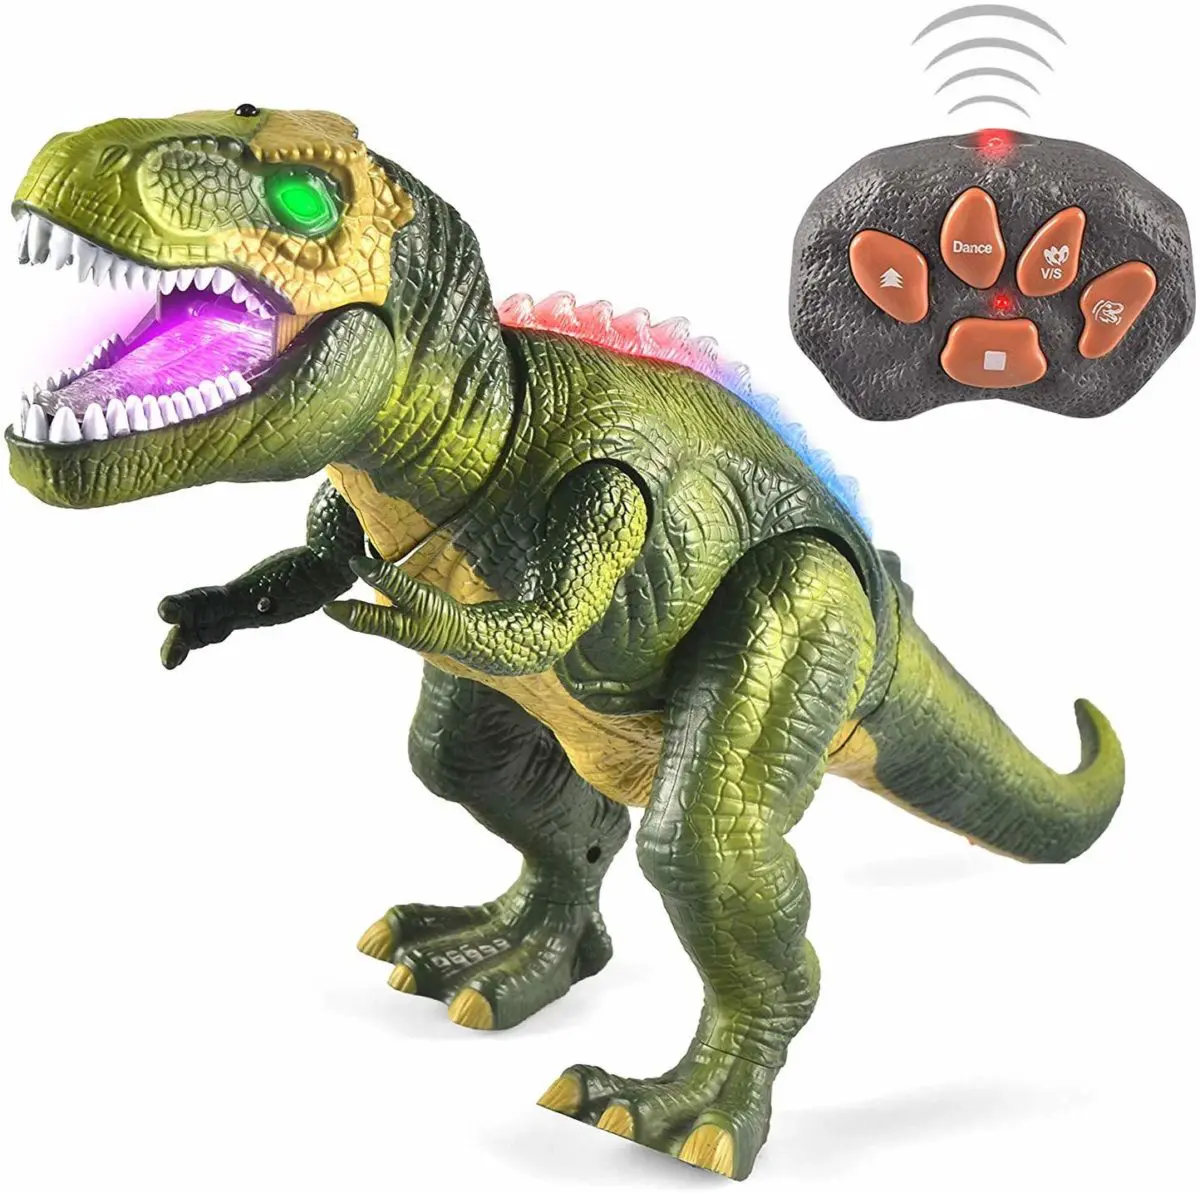 JOYIN LED Light Up Remote Control Walking Dinosaur - Top Toys and Gifts for Seven Year Old Boys 1